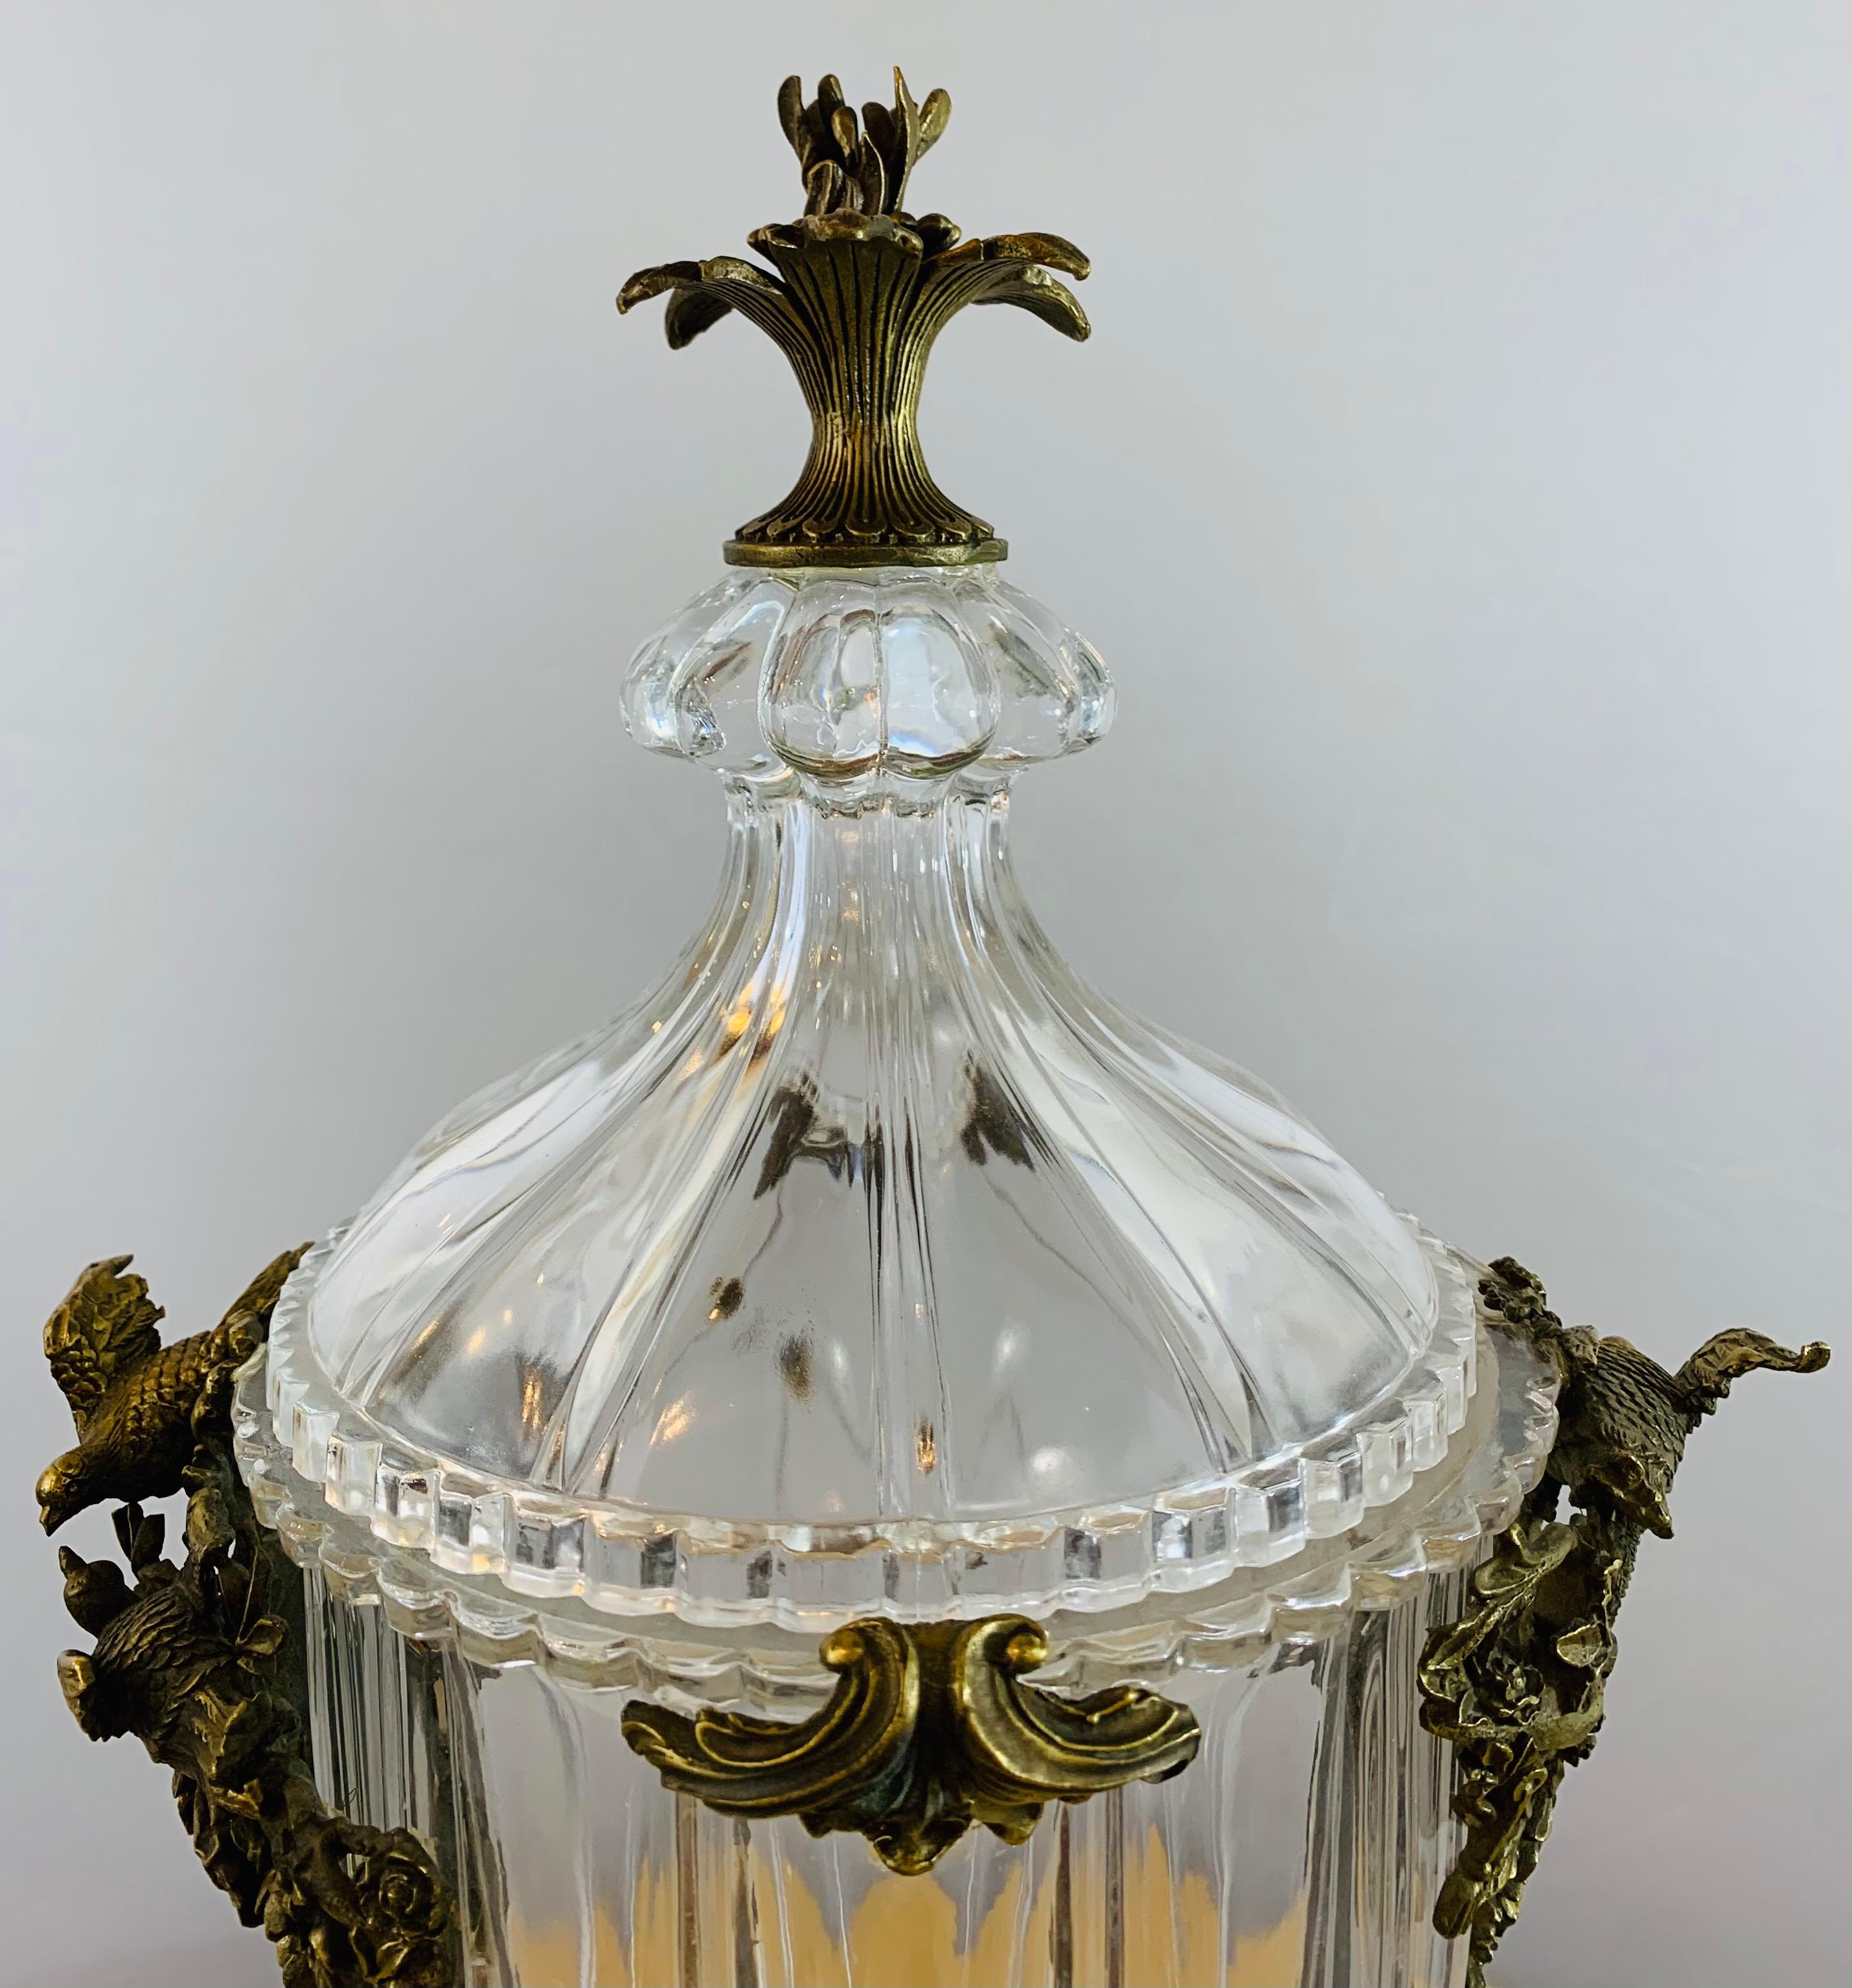 A classy French Empire style pair of bronze mounted cut crystal urn or vase featuring fine eagles and flowers bonze design on the sides and a blooming tulip shaped design on top of the lid 

Dimensions: 10